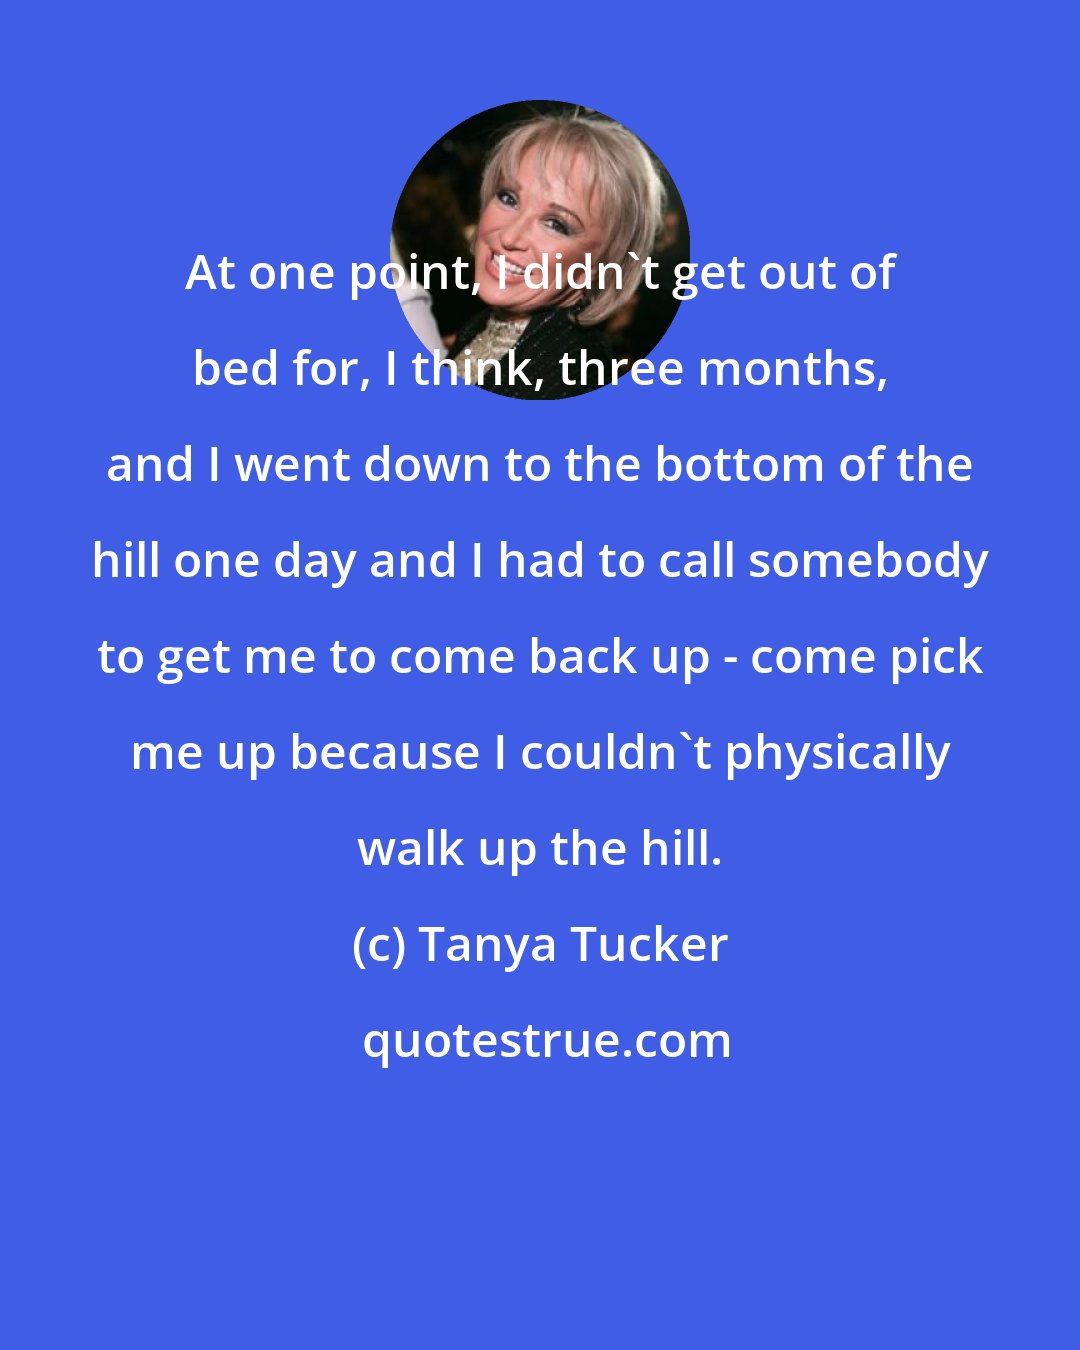 Tanya Tucker: At one point, I didn't get out of bed for, I think, three months, and I went down to the bottom of the hill one day and I had to call somebody to get me to come back up - come pick me up because I couldn't physically walk up the hill.